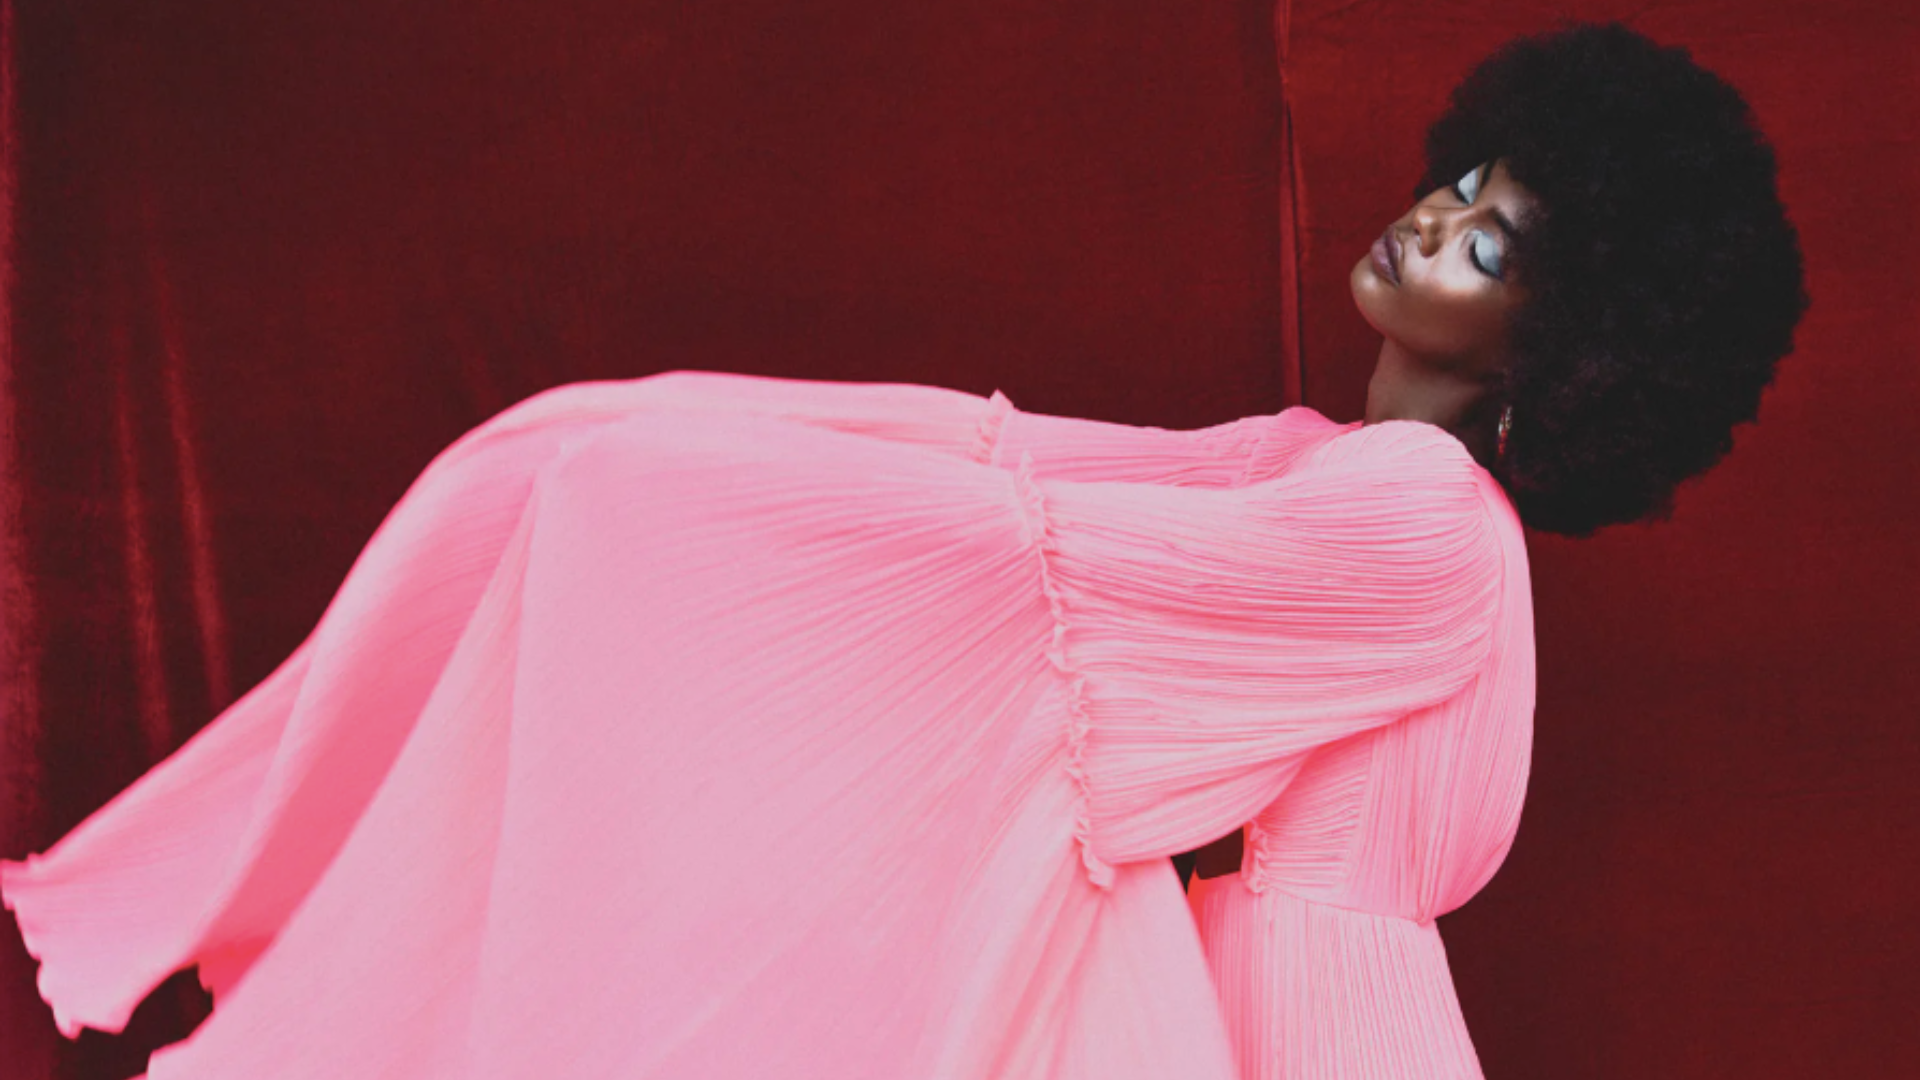 Alluring Fashion Gift Ideas From Black-Owned Brands: Atelier Ndigo, Hanifa, And More